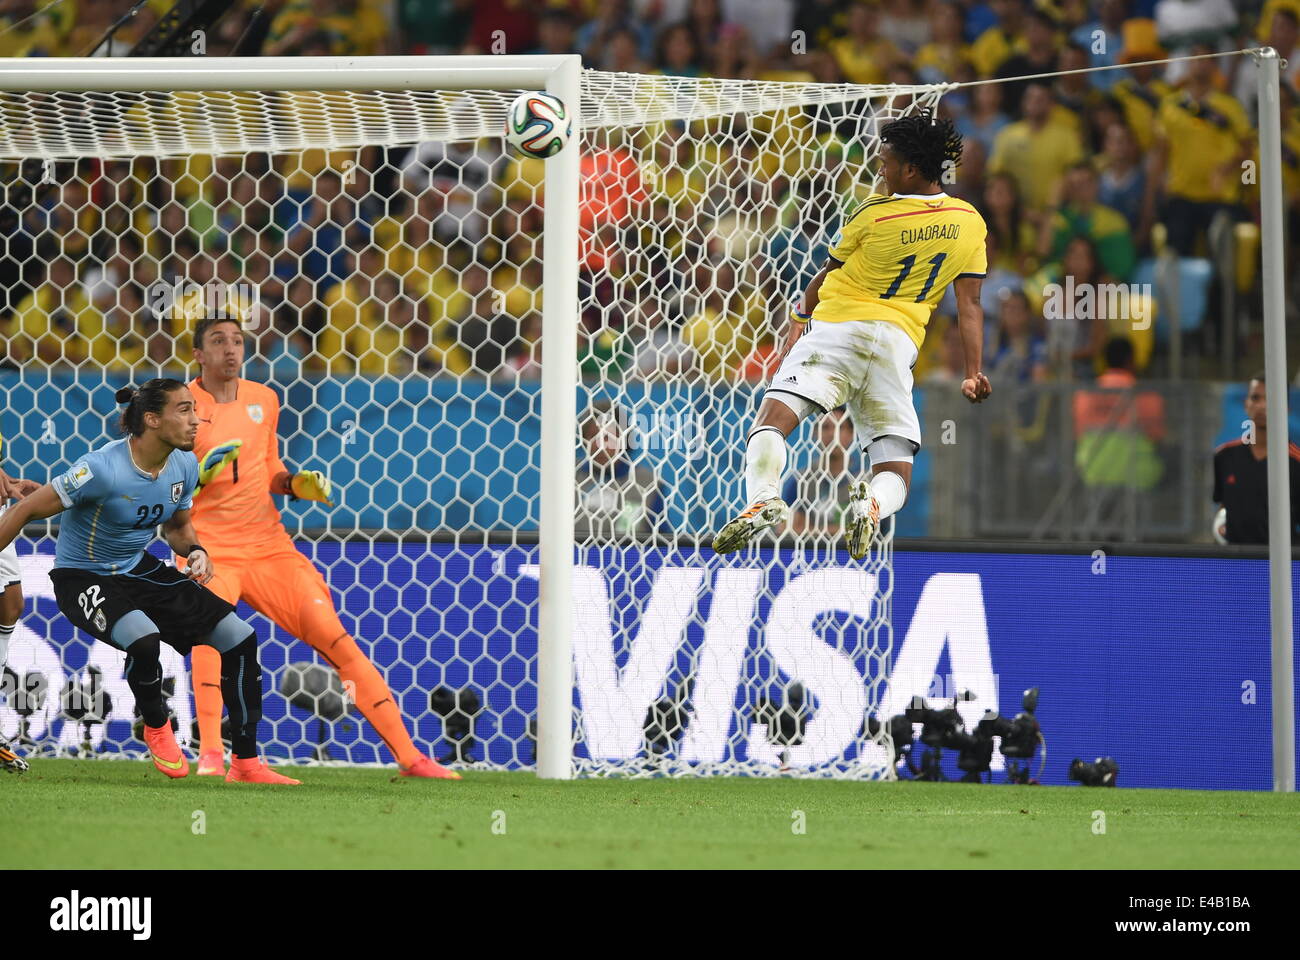 Rio De Janeiro, Brazil. 28th June, 2014. (R-L) Juan Cuadrado (COL), Fernando Muslera, Martin Caceres (URU) Football/Soccer : Juan Cuadrado of Colombia assists his team's second goal during the FIFA World Cup Brazil 2014 Round of 16 match between Colombia 2-0 Uruguay at Estadio do Maracana in Rio De Janeiro, Brazil . © SONG Seak-In/AFLO/Alamy Live News Stock Photo